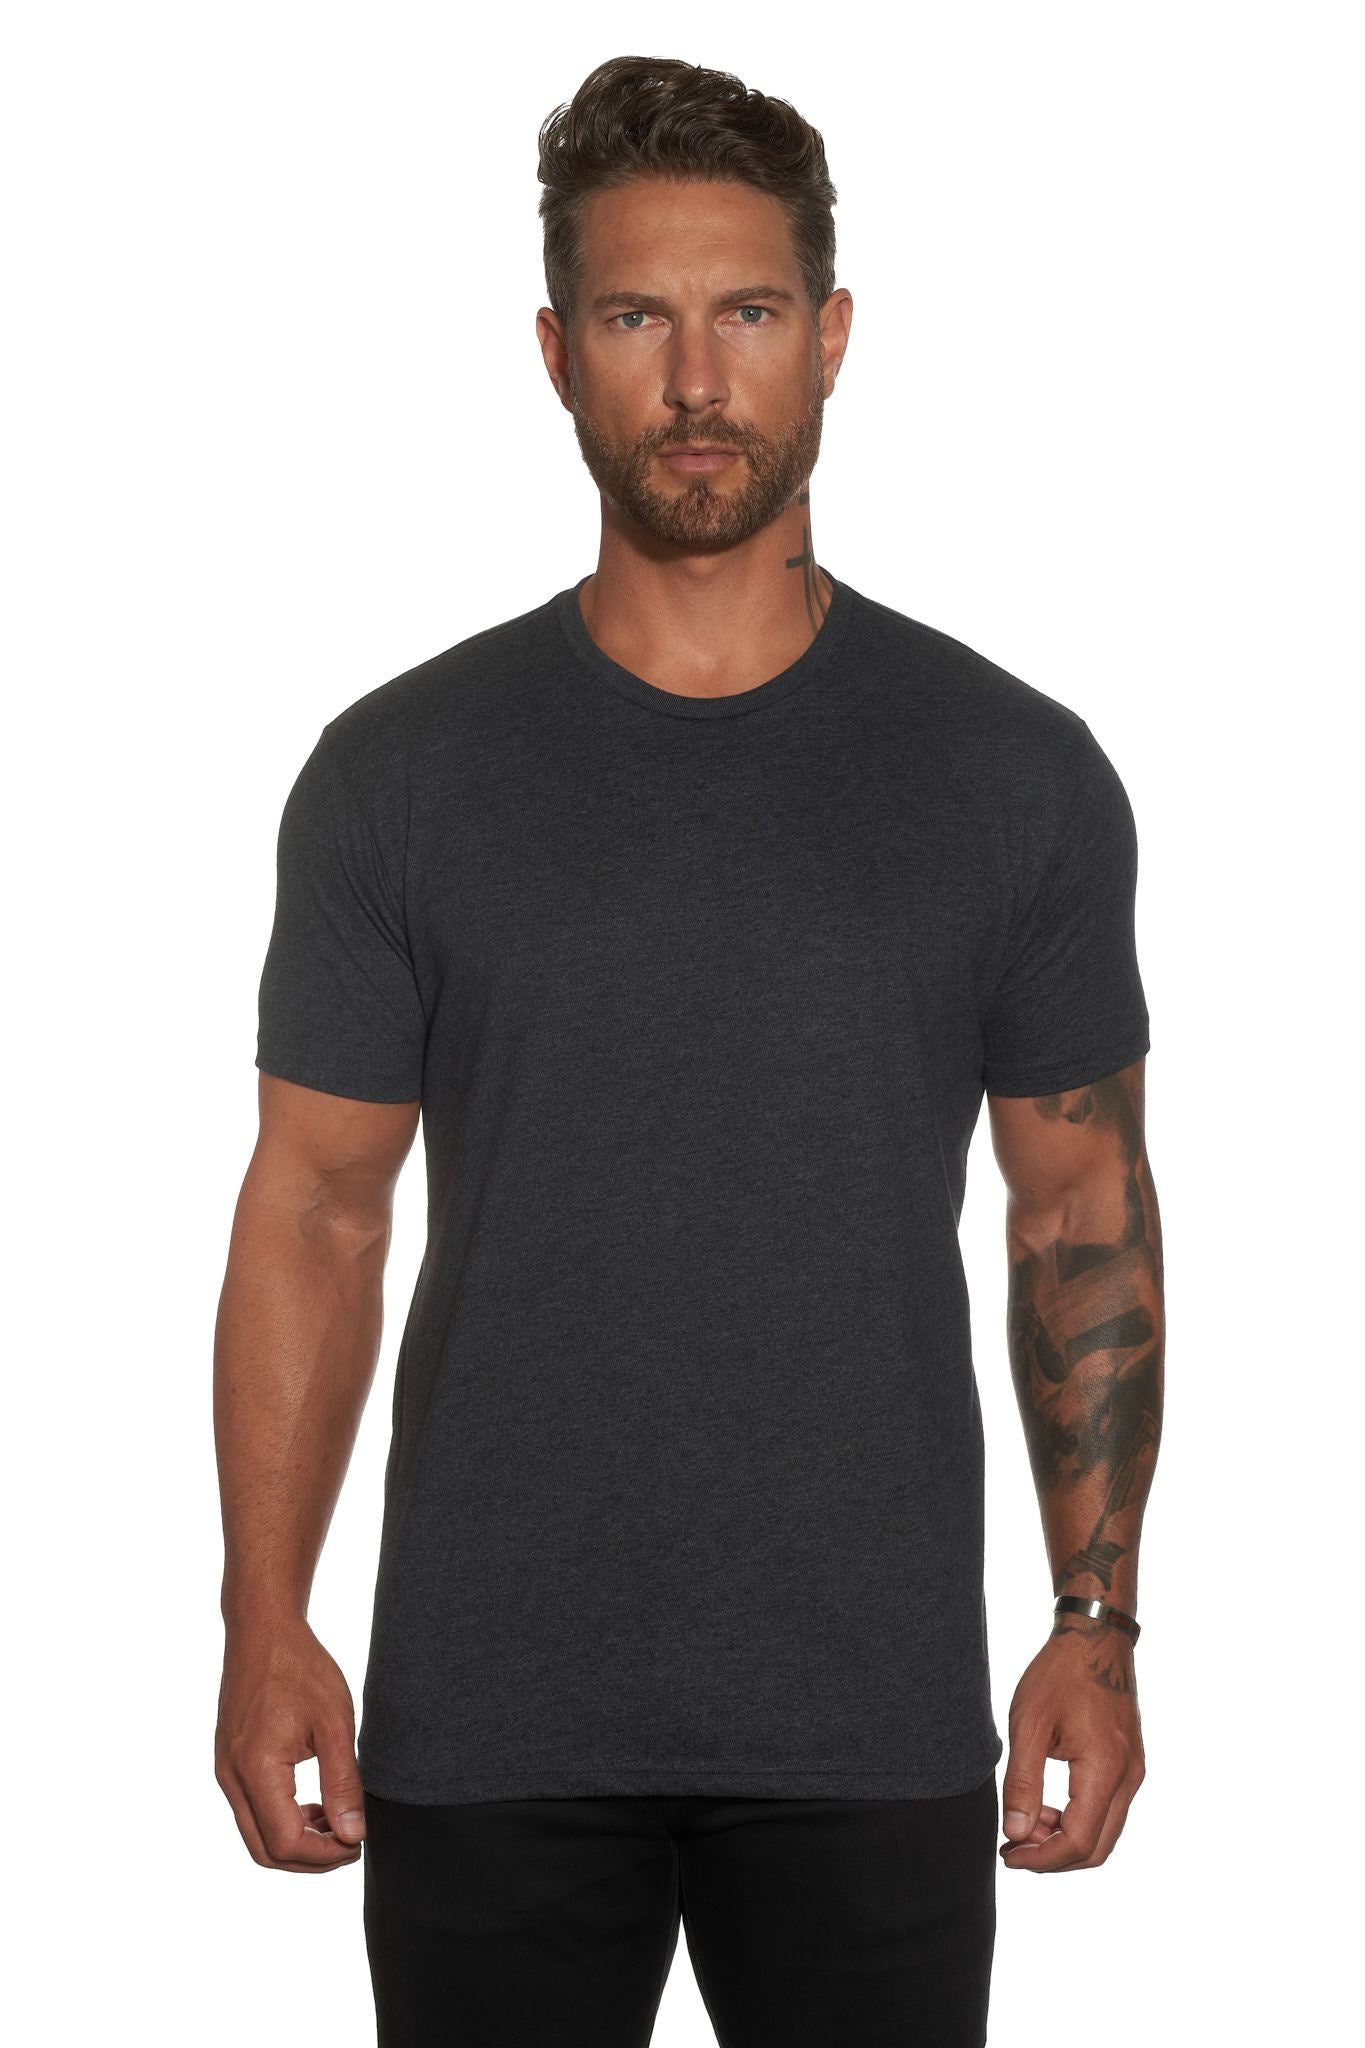 The Ultra Soft Fitted Crew Neck T-Shirt by WESTON JON BOUCHÉR